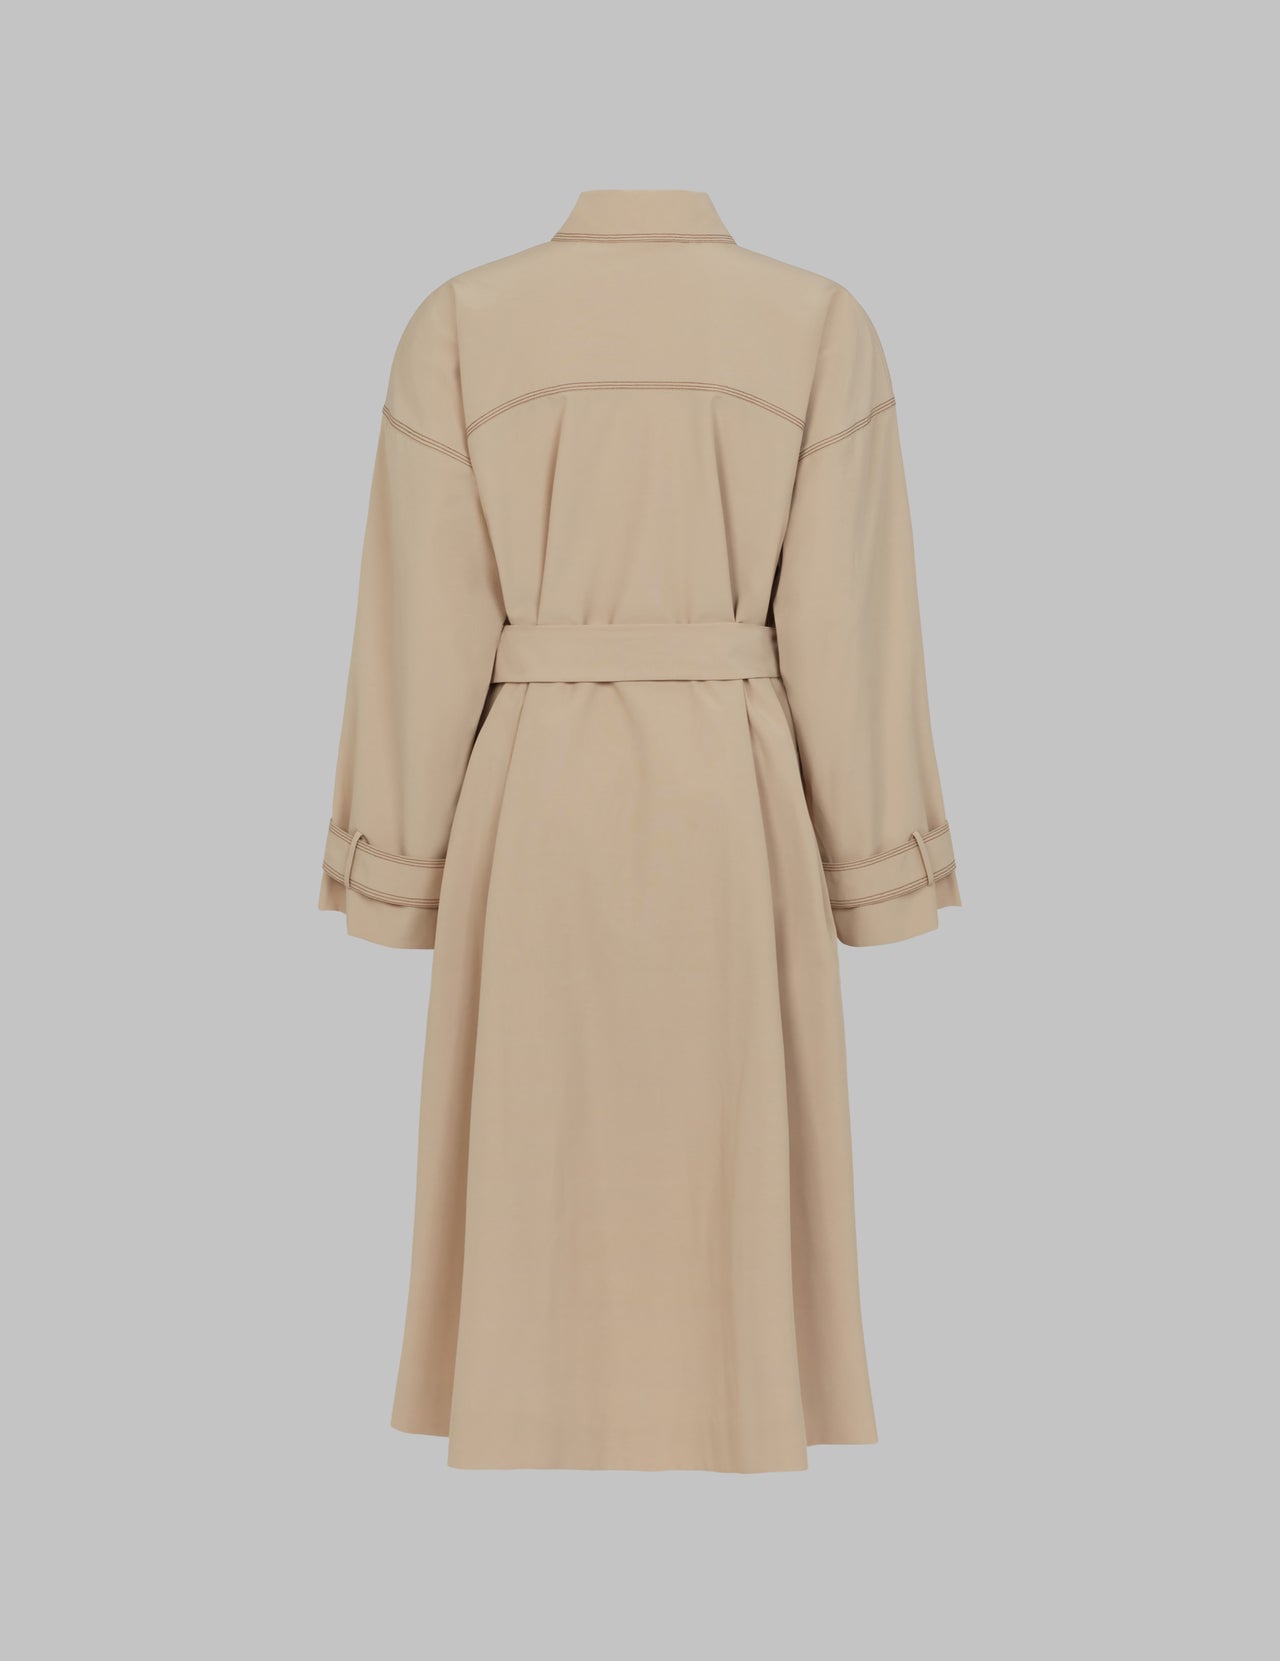  Sand Organic Cotton and Recycled Polyester Duster Coat  